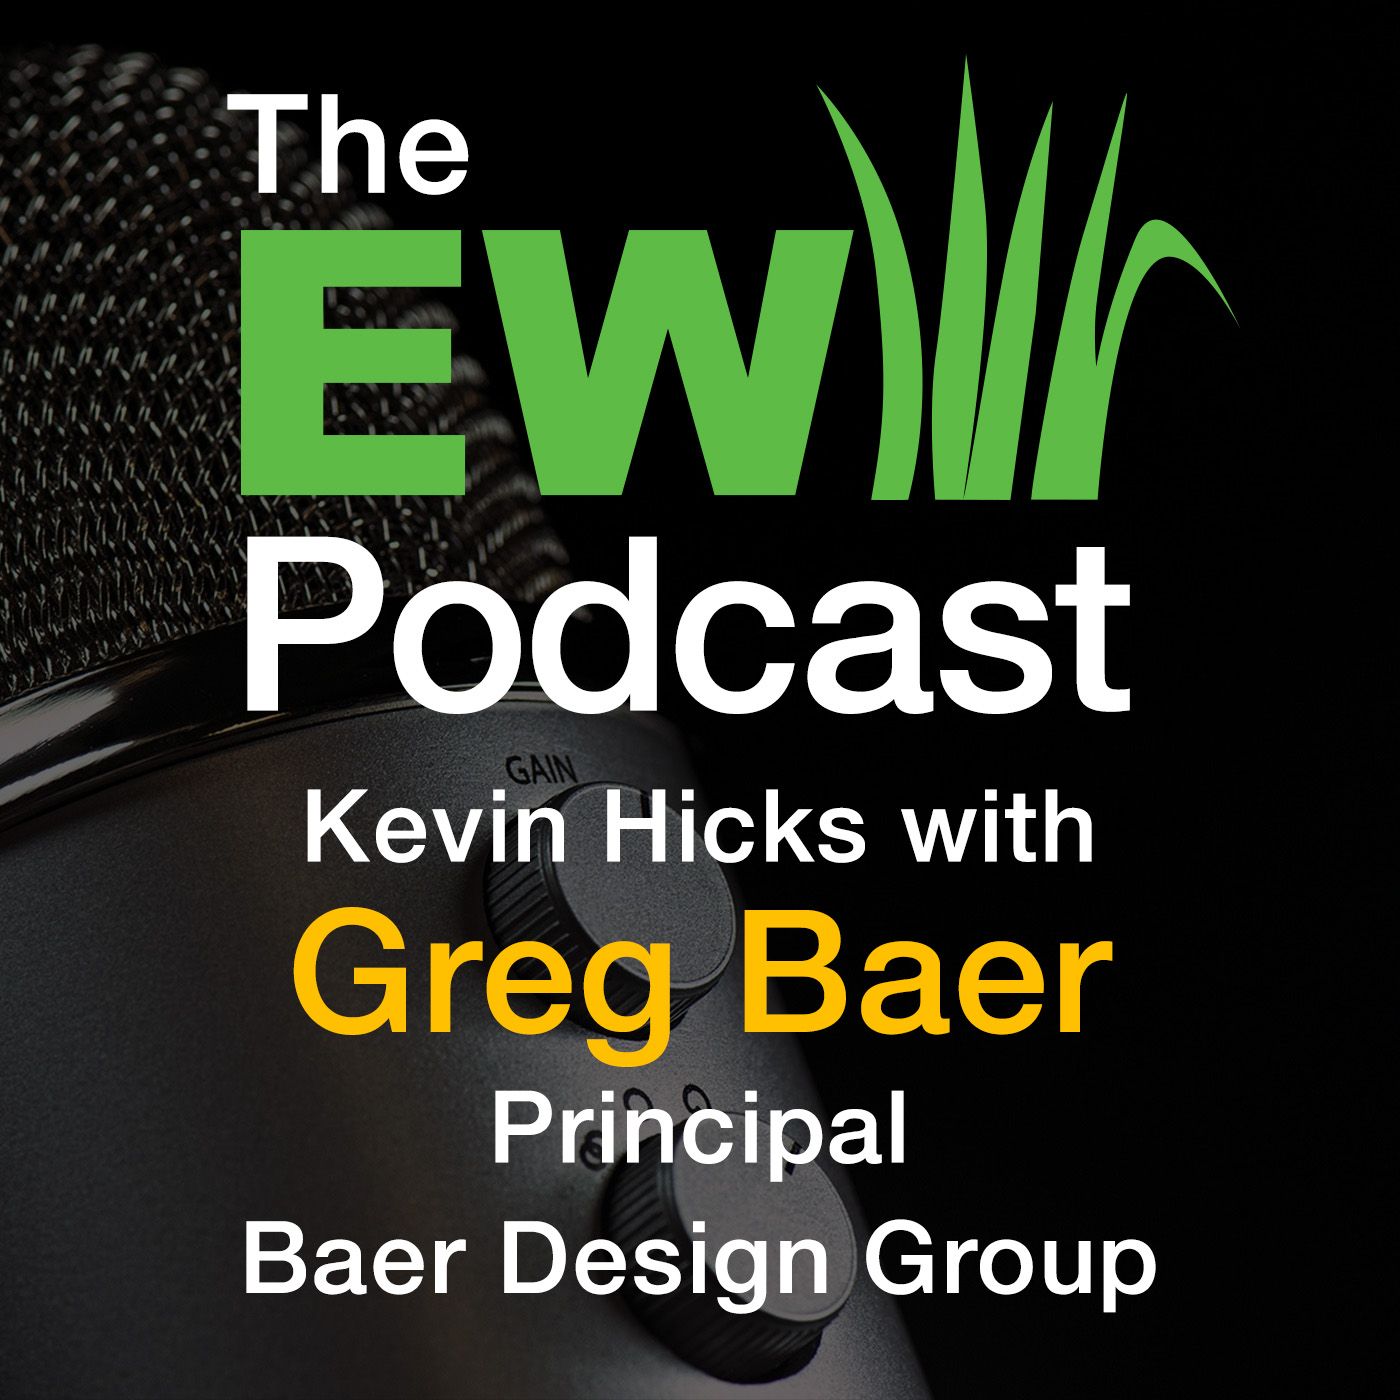 The EW Podcast - Kevin Hicks with Greg Baer